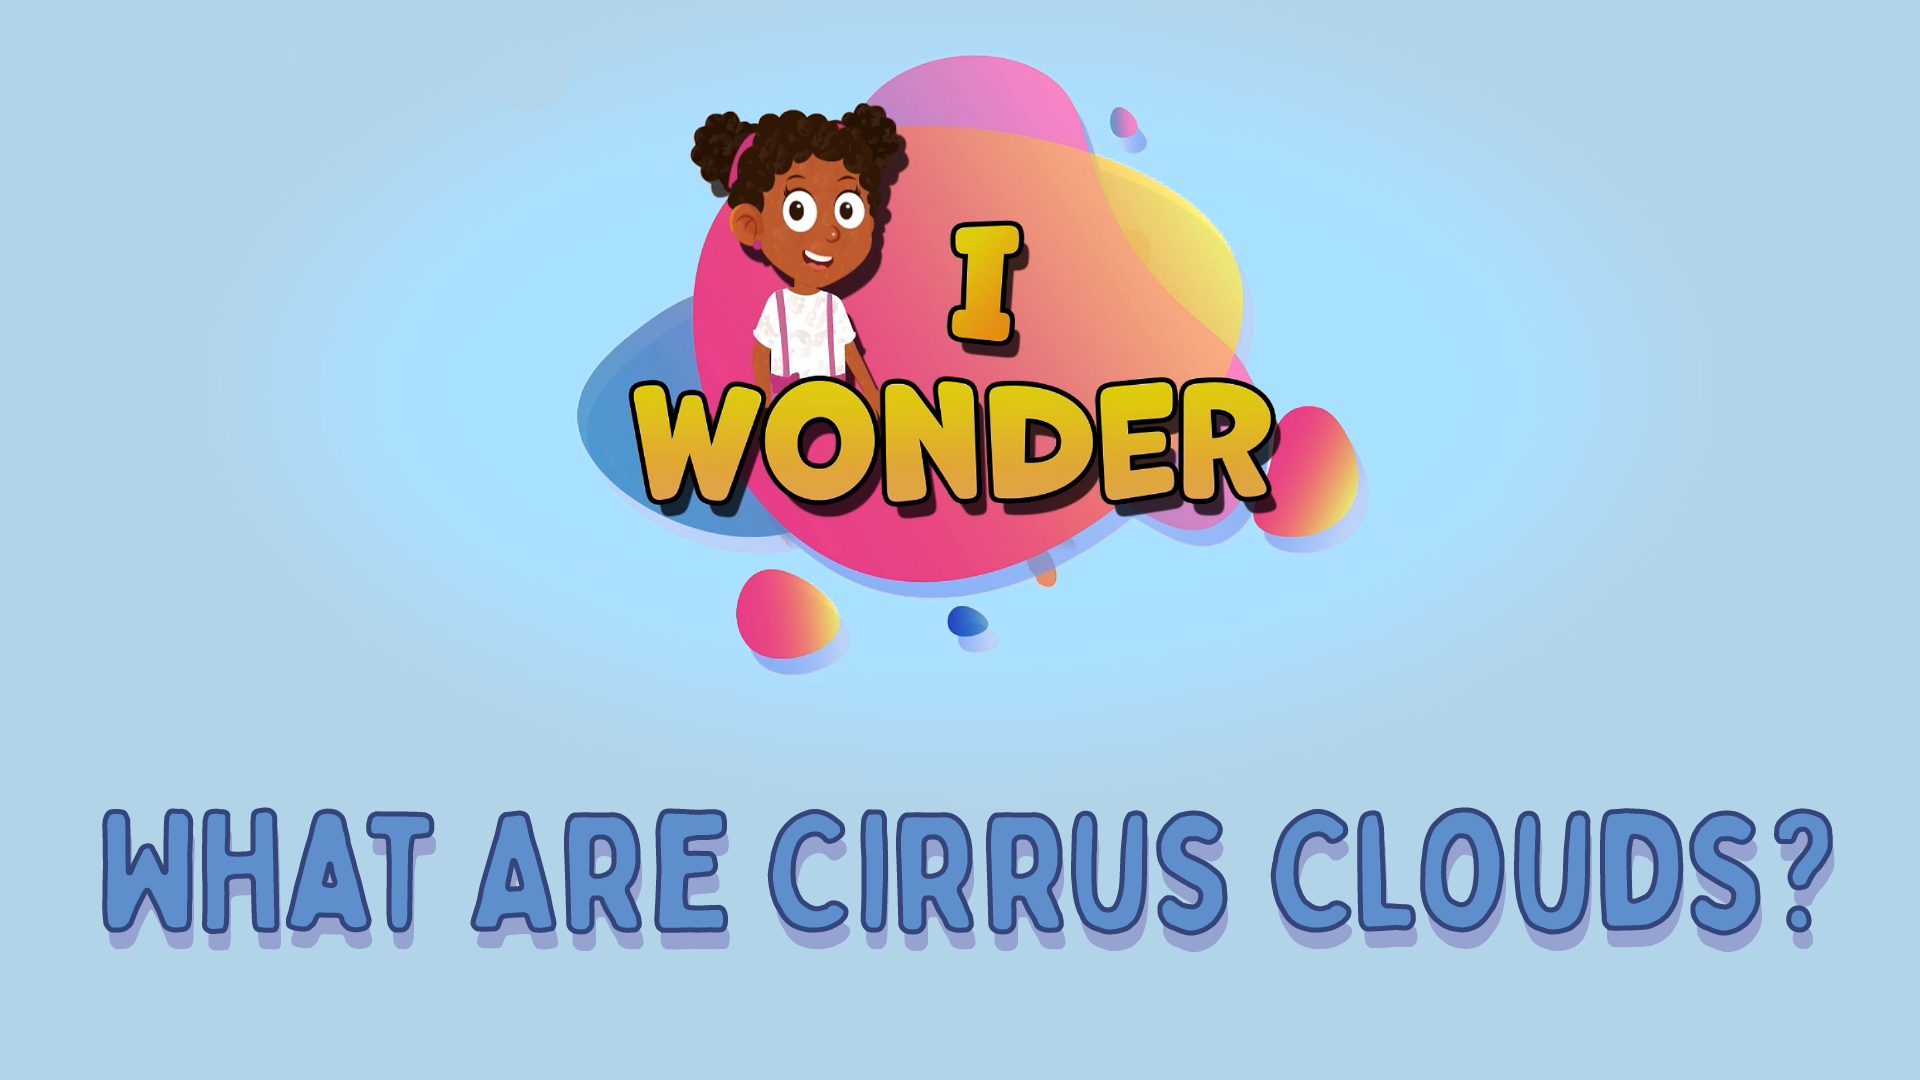 What Are Cirrus Clouds?